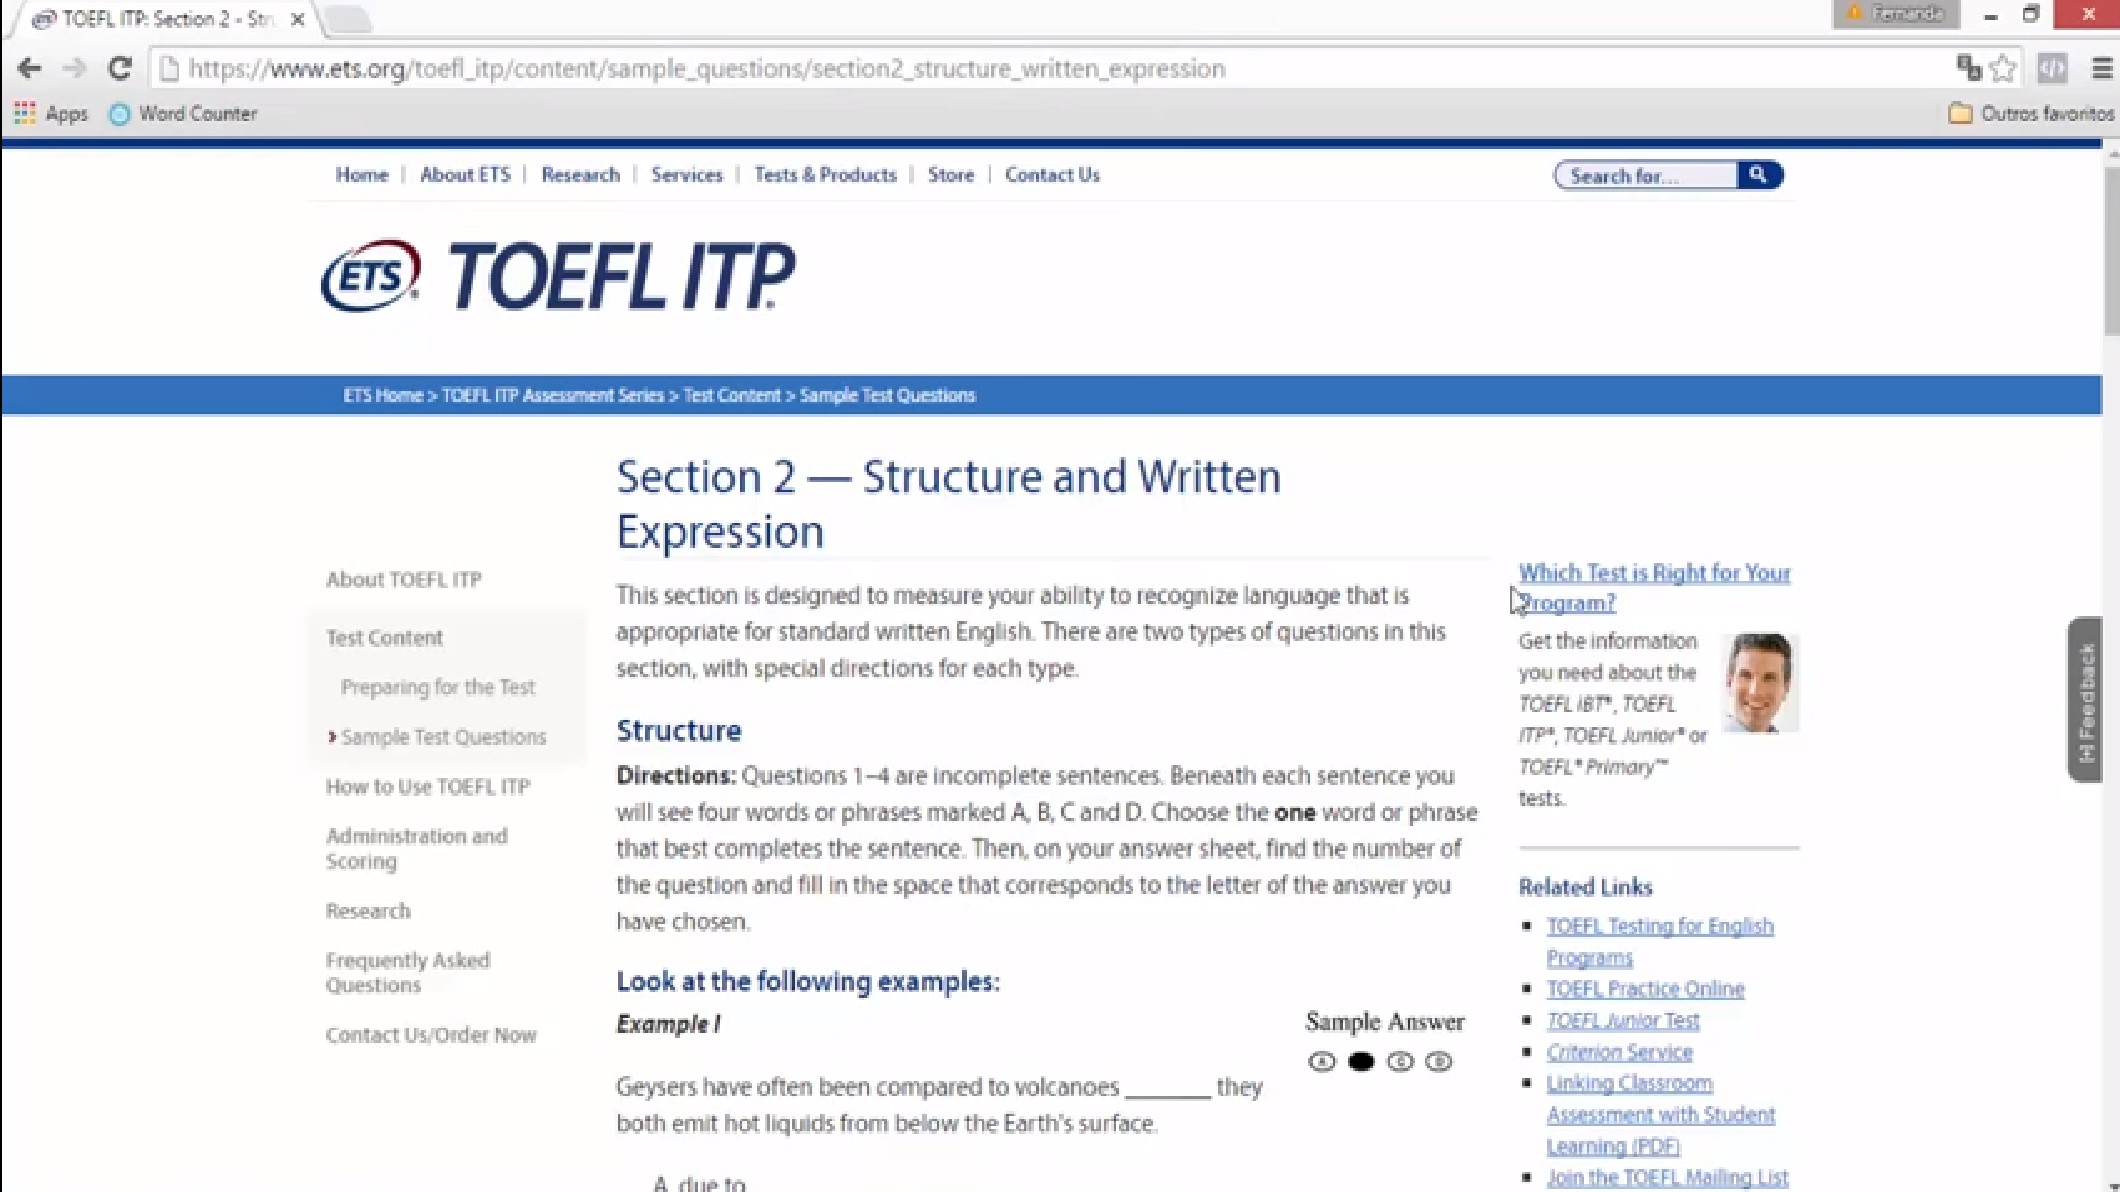 download toefl itp in the eaely 1900